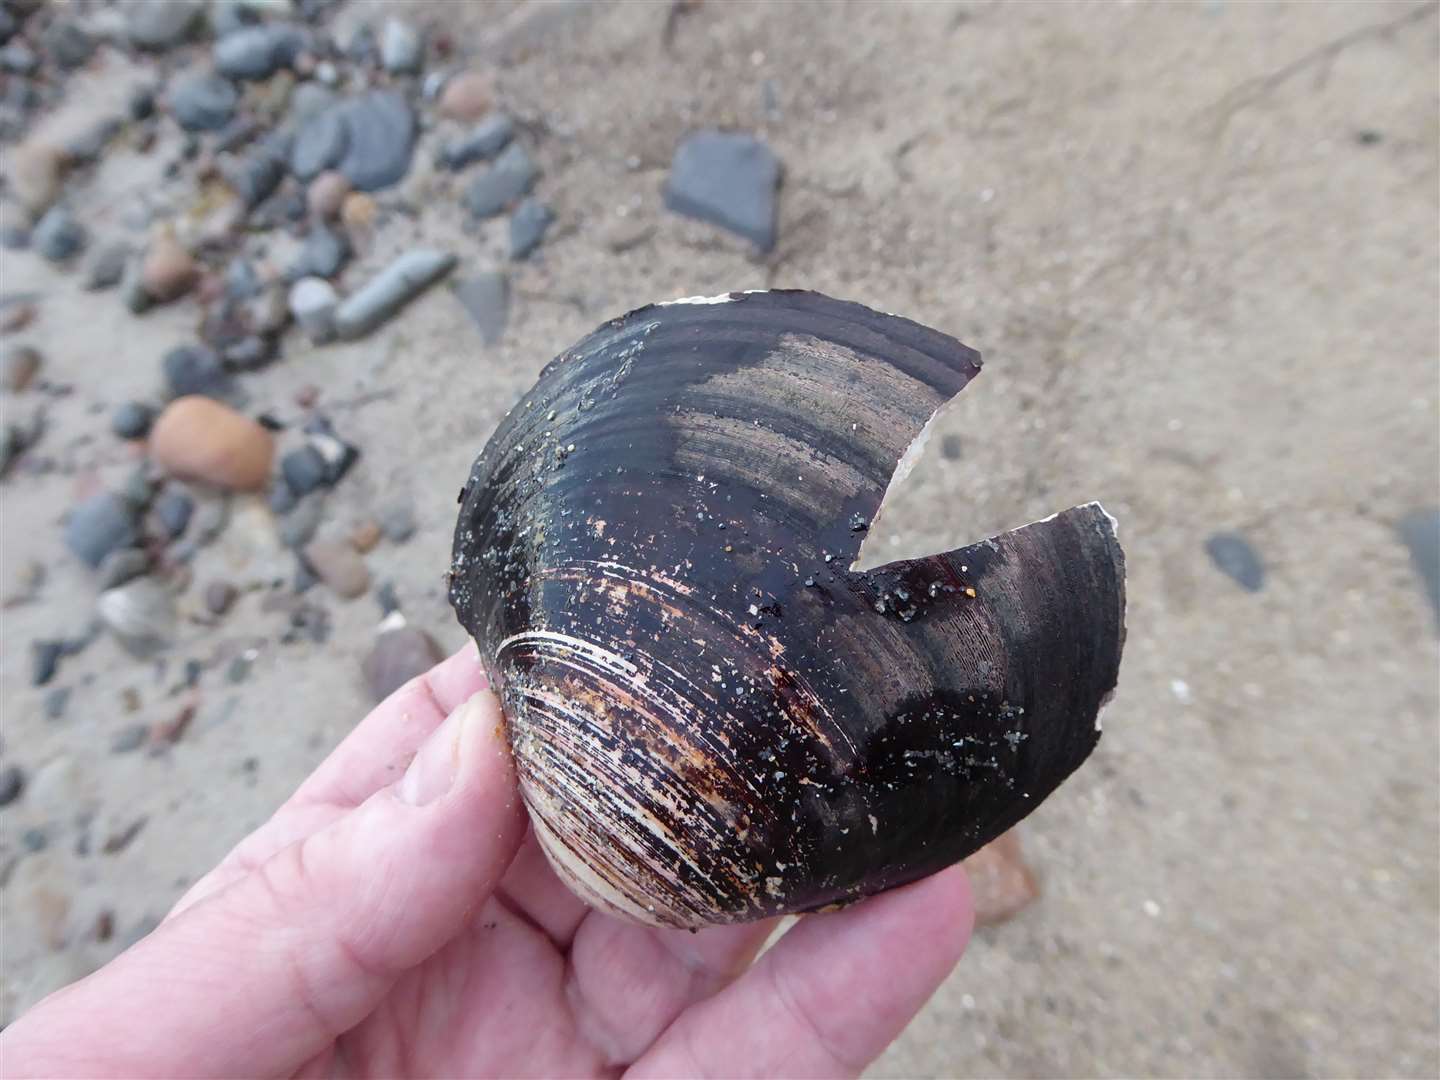 Broken shells like this one found at Reiss beach can show evidence of damage caused by dredging the seabed.